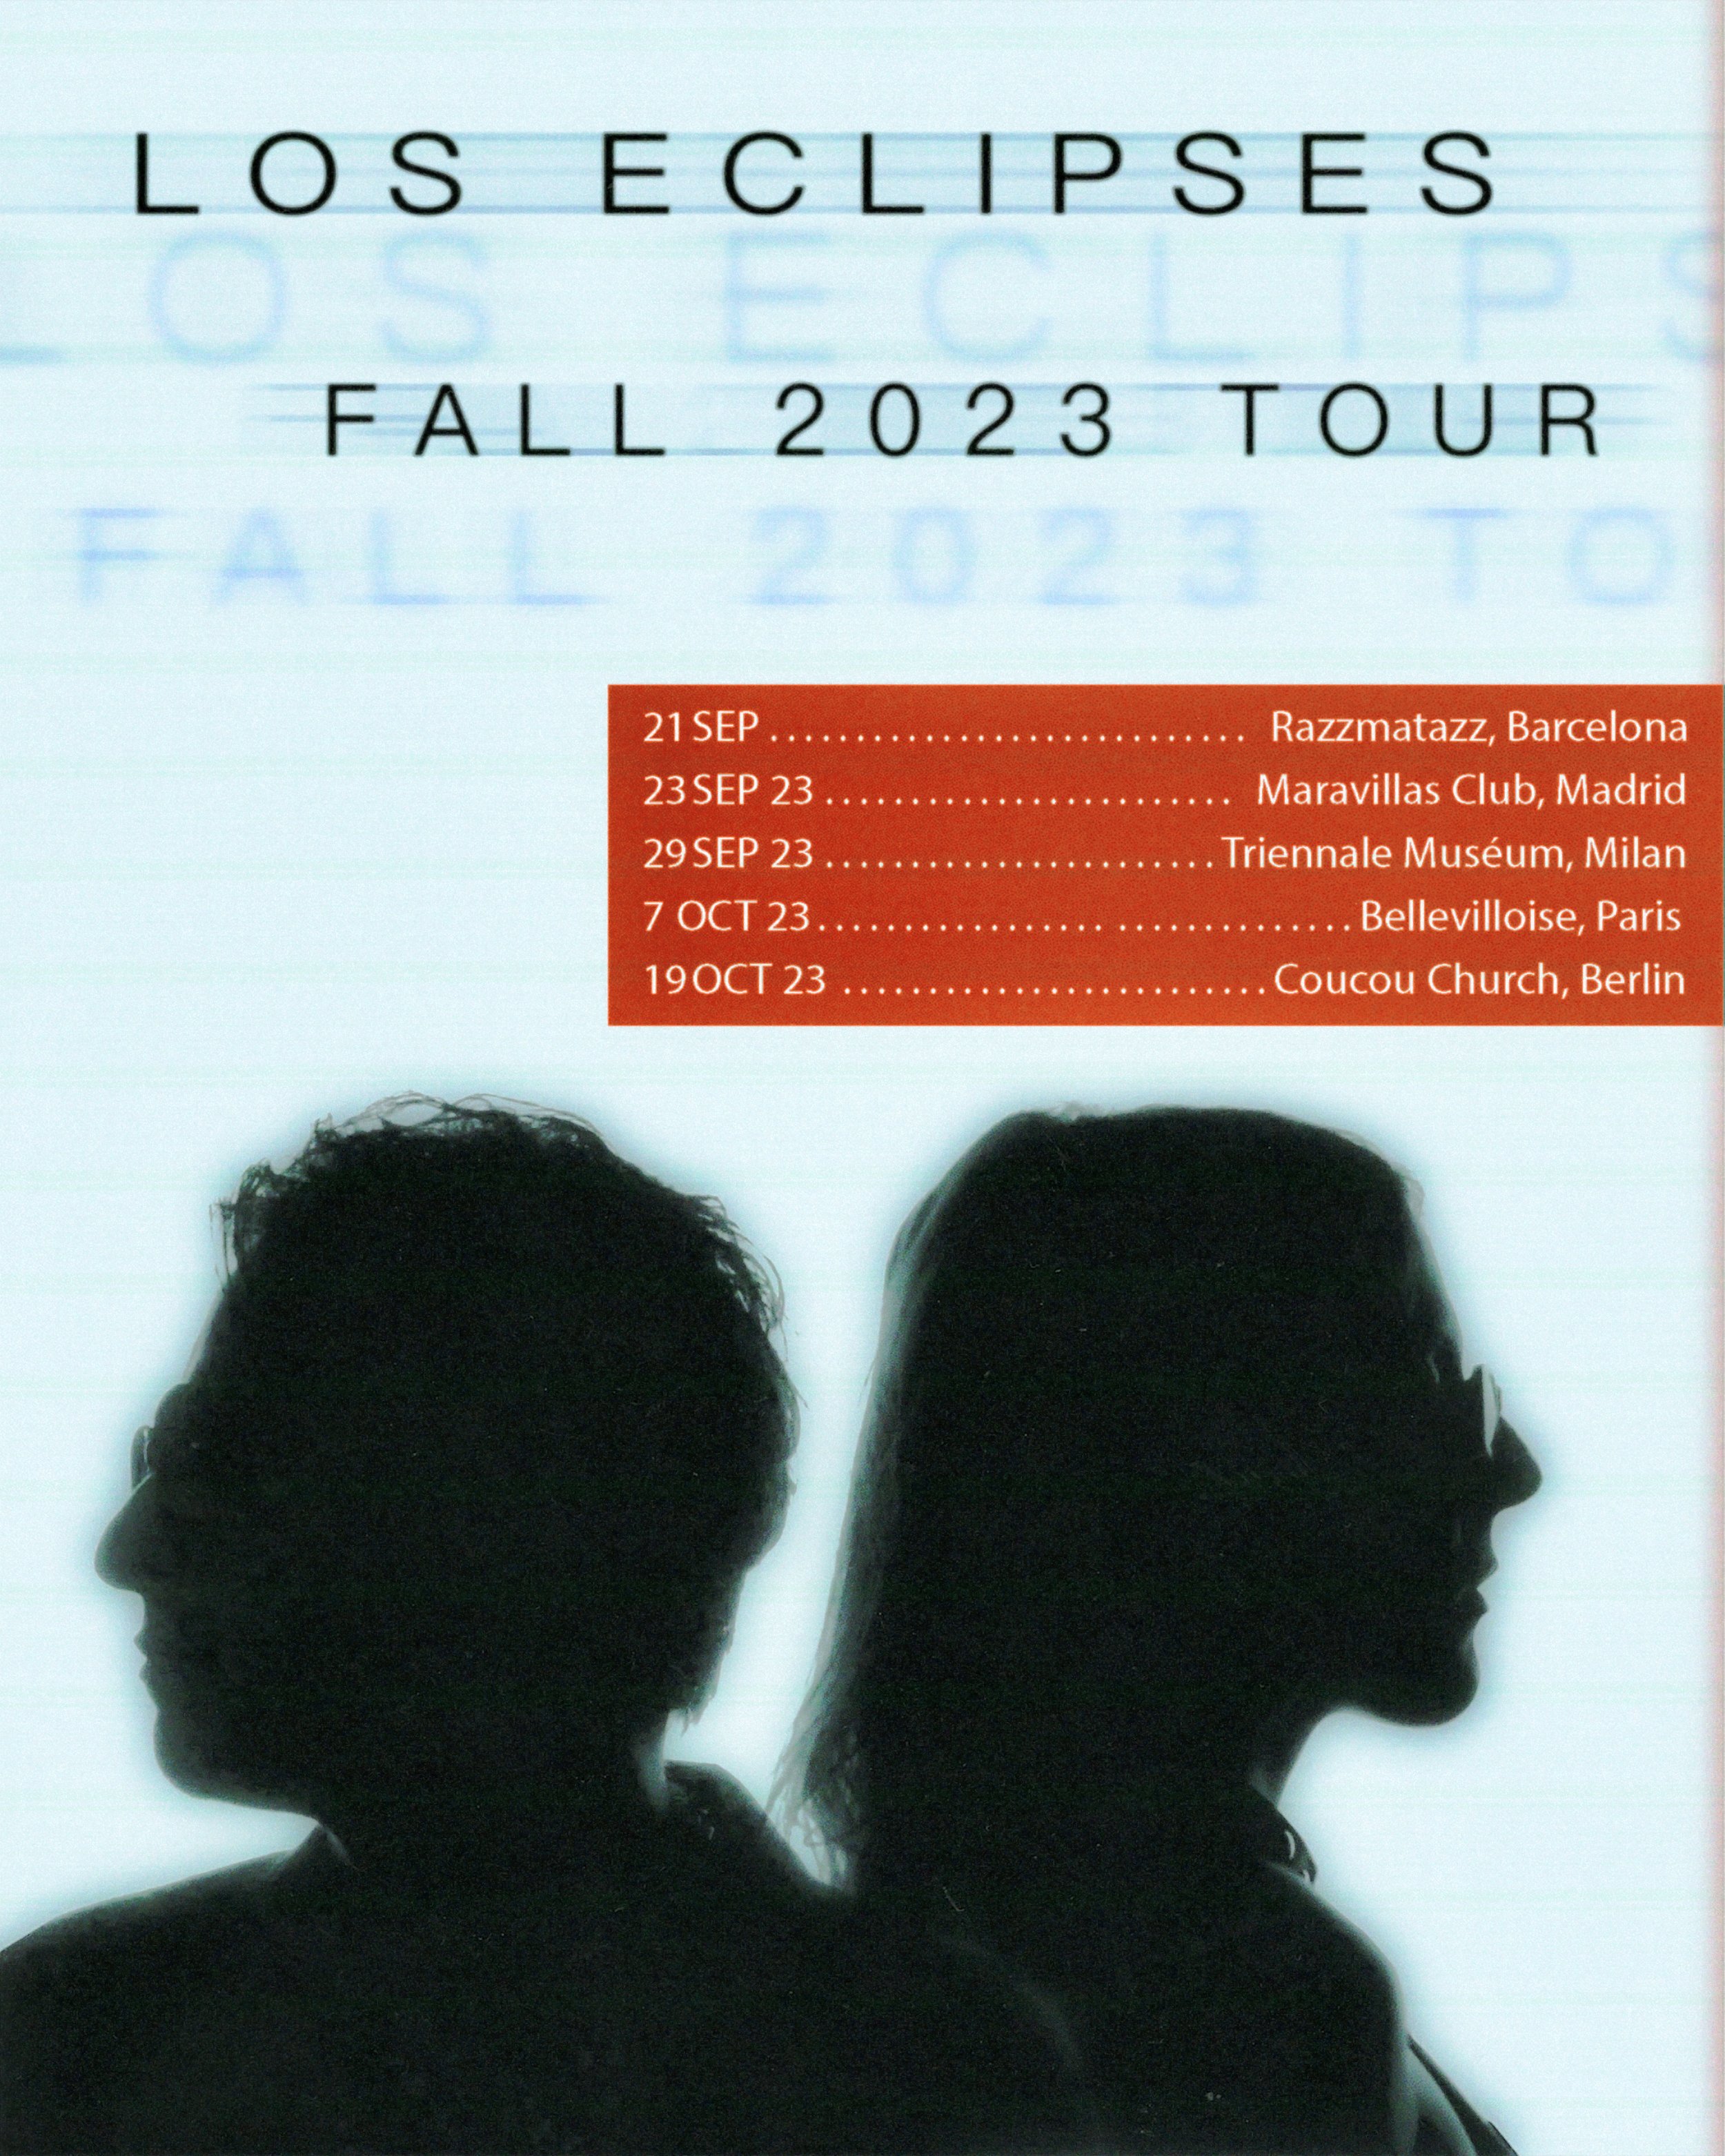 Los Eclipses Fall 2023 Tour